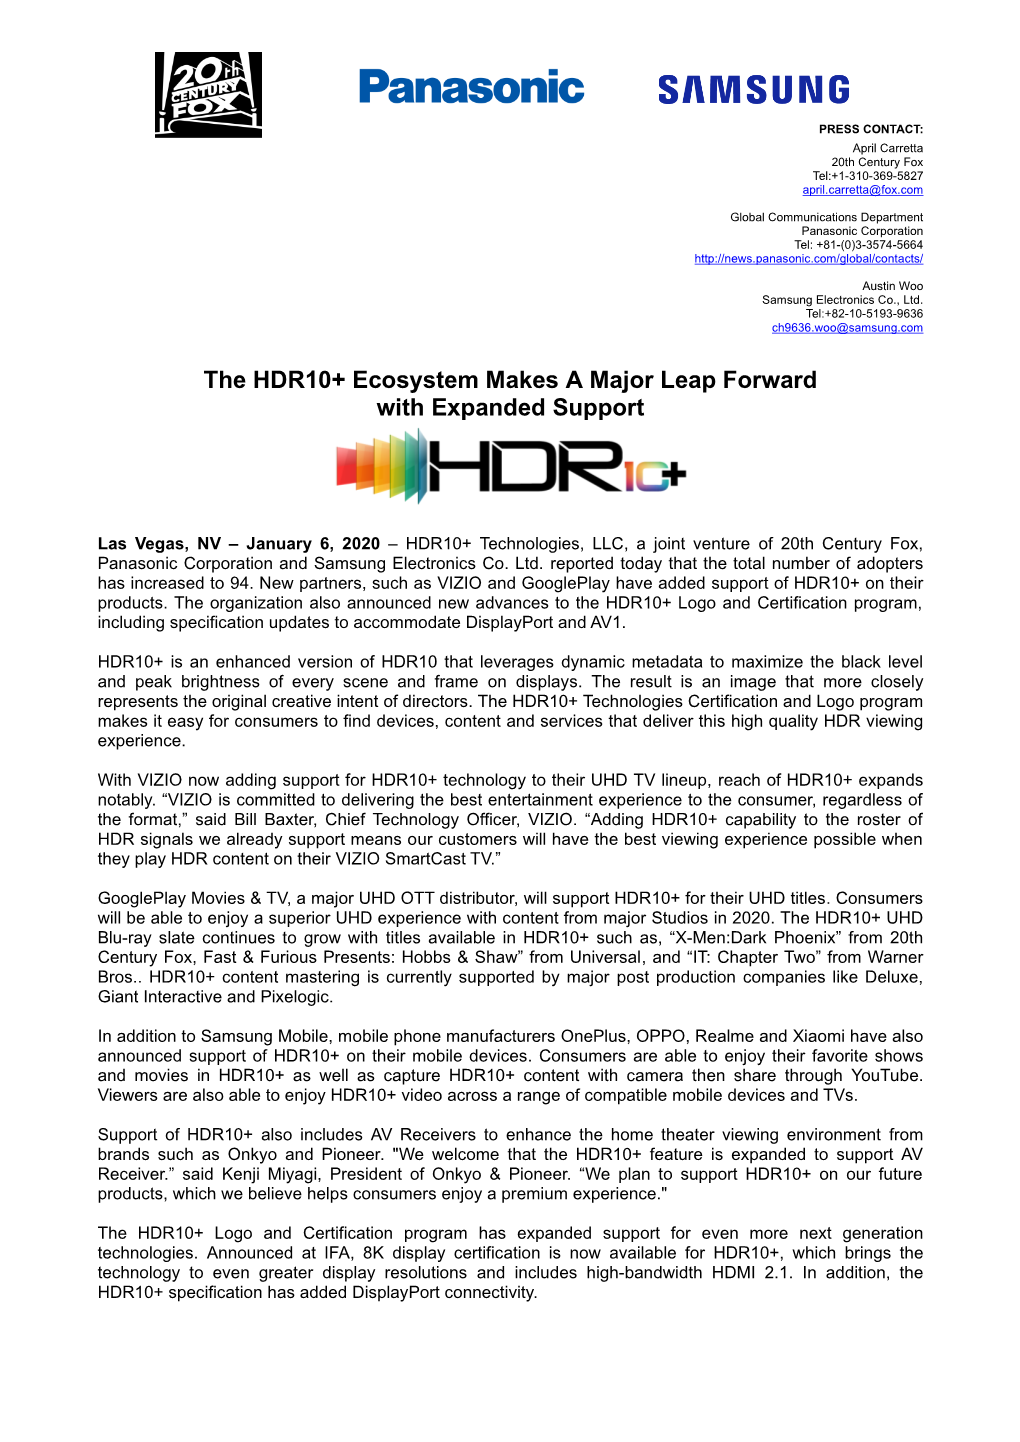 The HDR10+ Ecosystem Makes a Major Leap Forward with Expanded Support